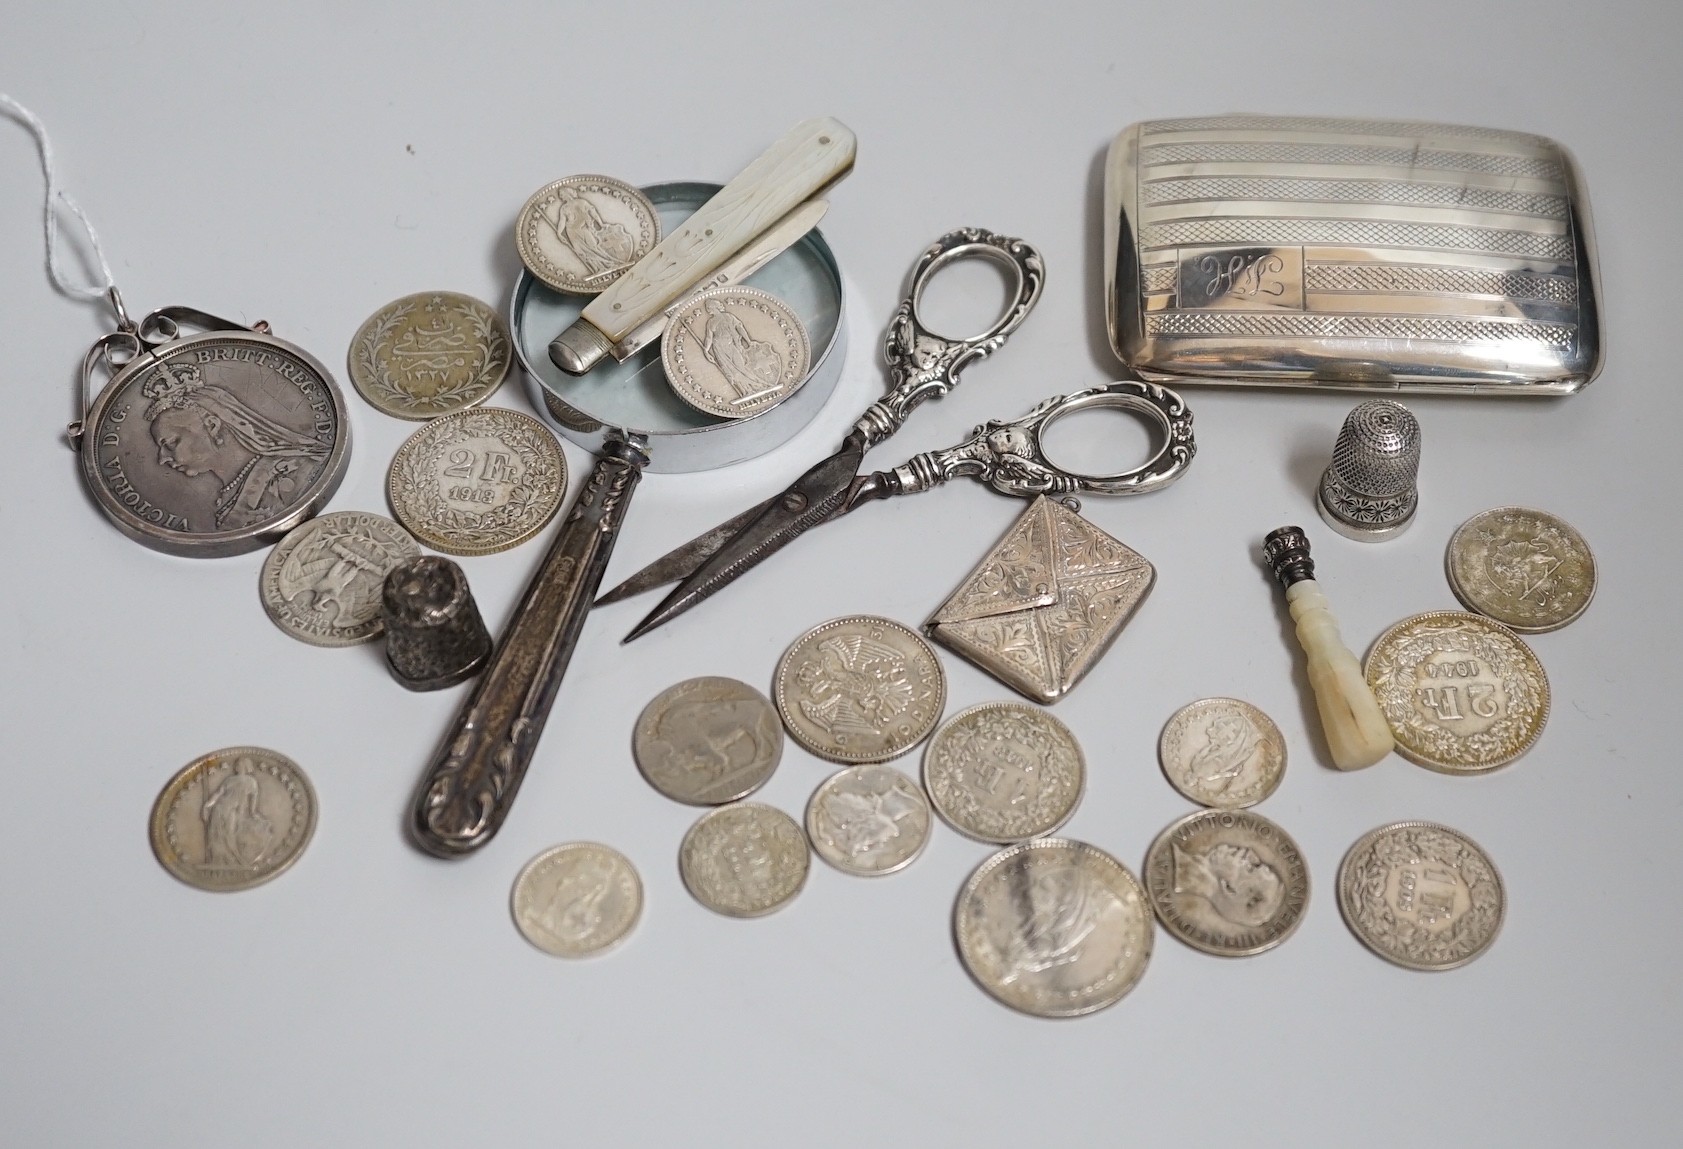 Miscellaneous small silver and white metal items including thimbles, a cigarette case, envelope